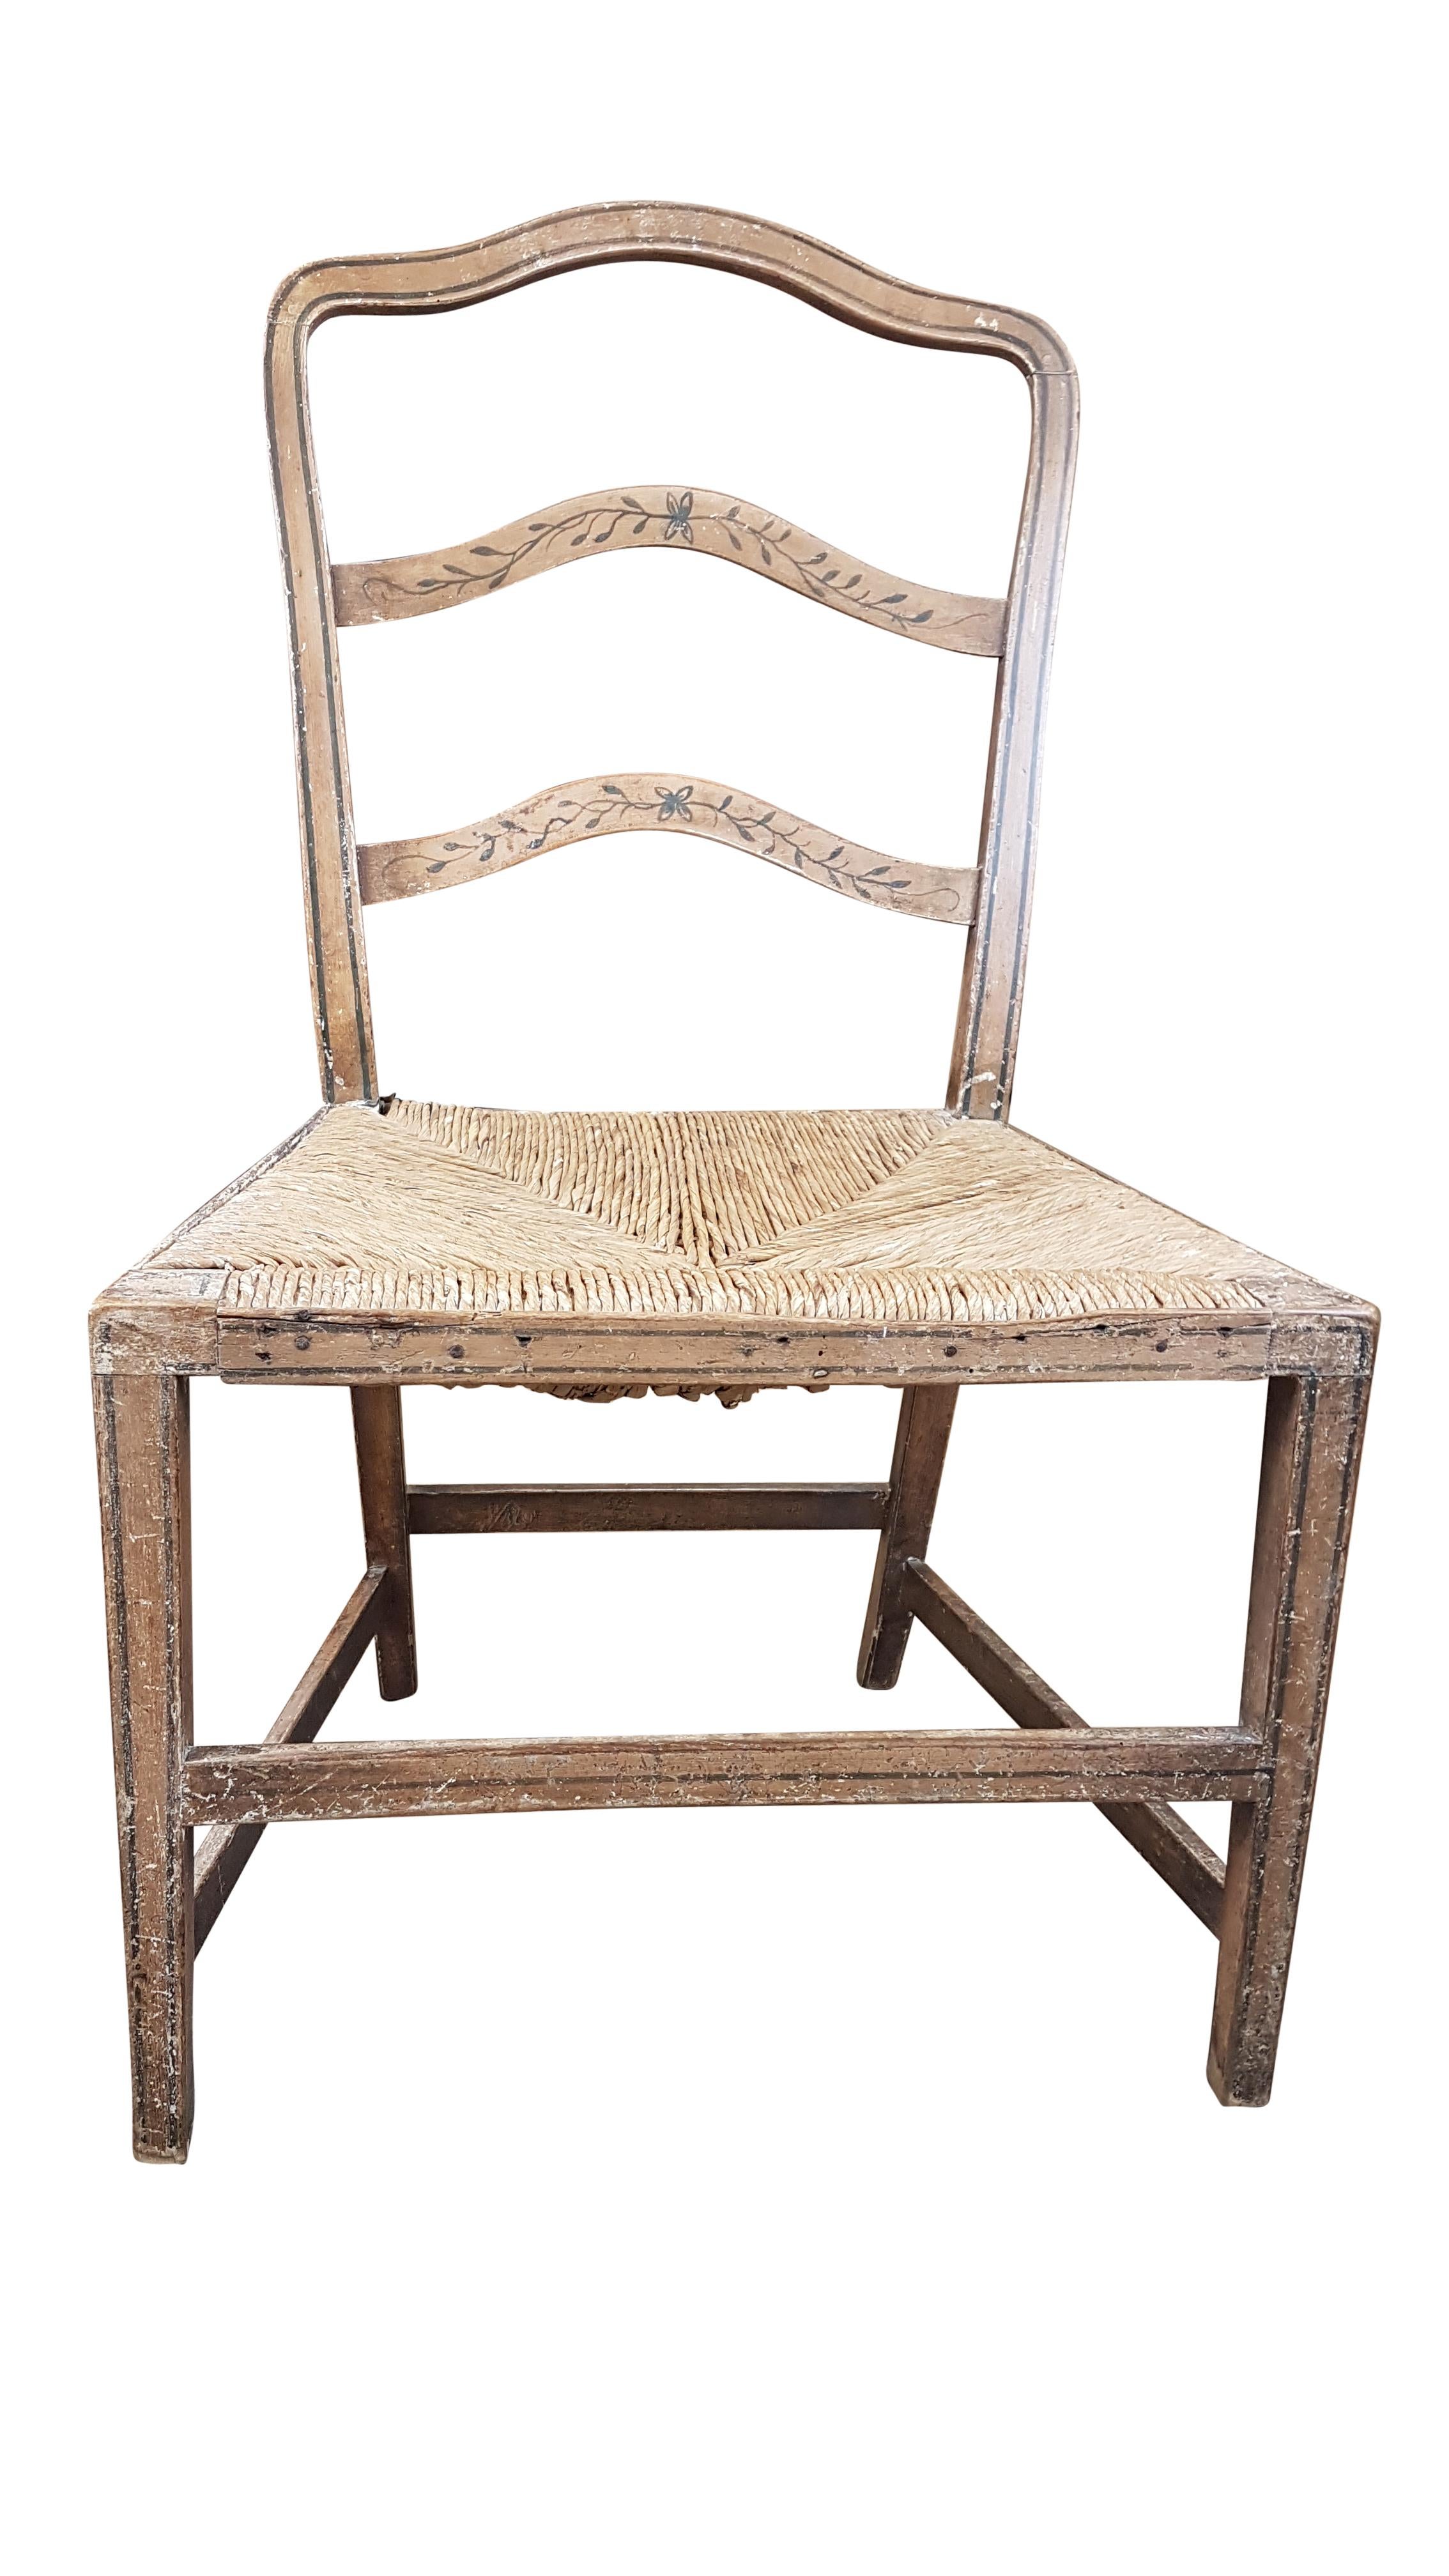 A very nice and rare early 19th century Georgian rush seated chair in original painted finish. The rush seat is in great condition and is the original seat, the painted finish whilst being scratched marked and worn is the original and the line and